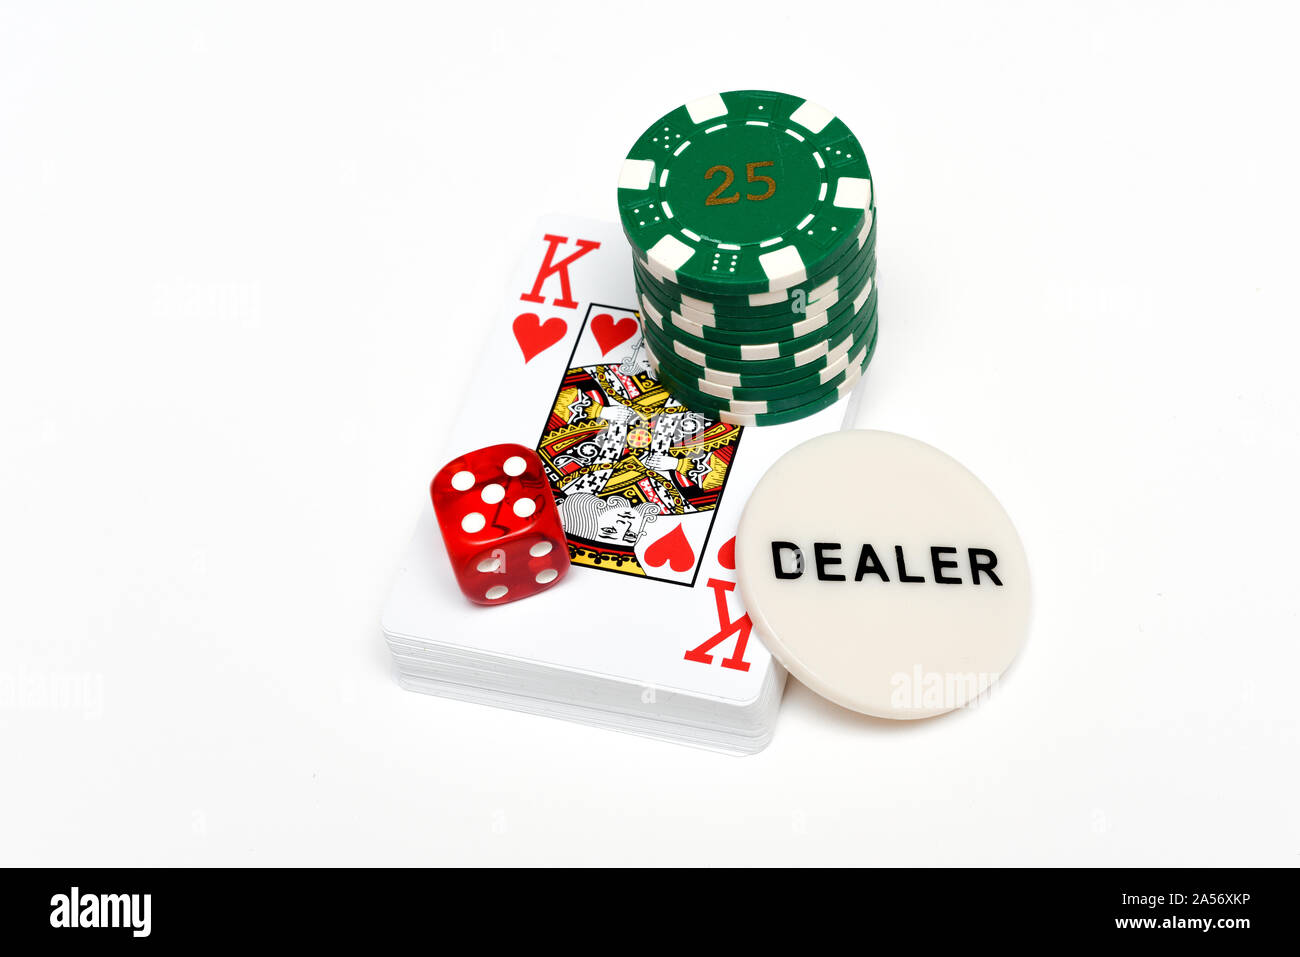 Casino objects playing cards dice casino chips isolated on white for playing chance and gambling games Stock Photo